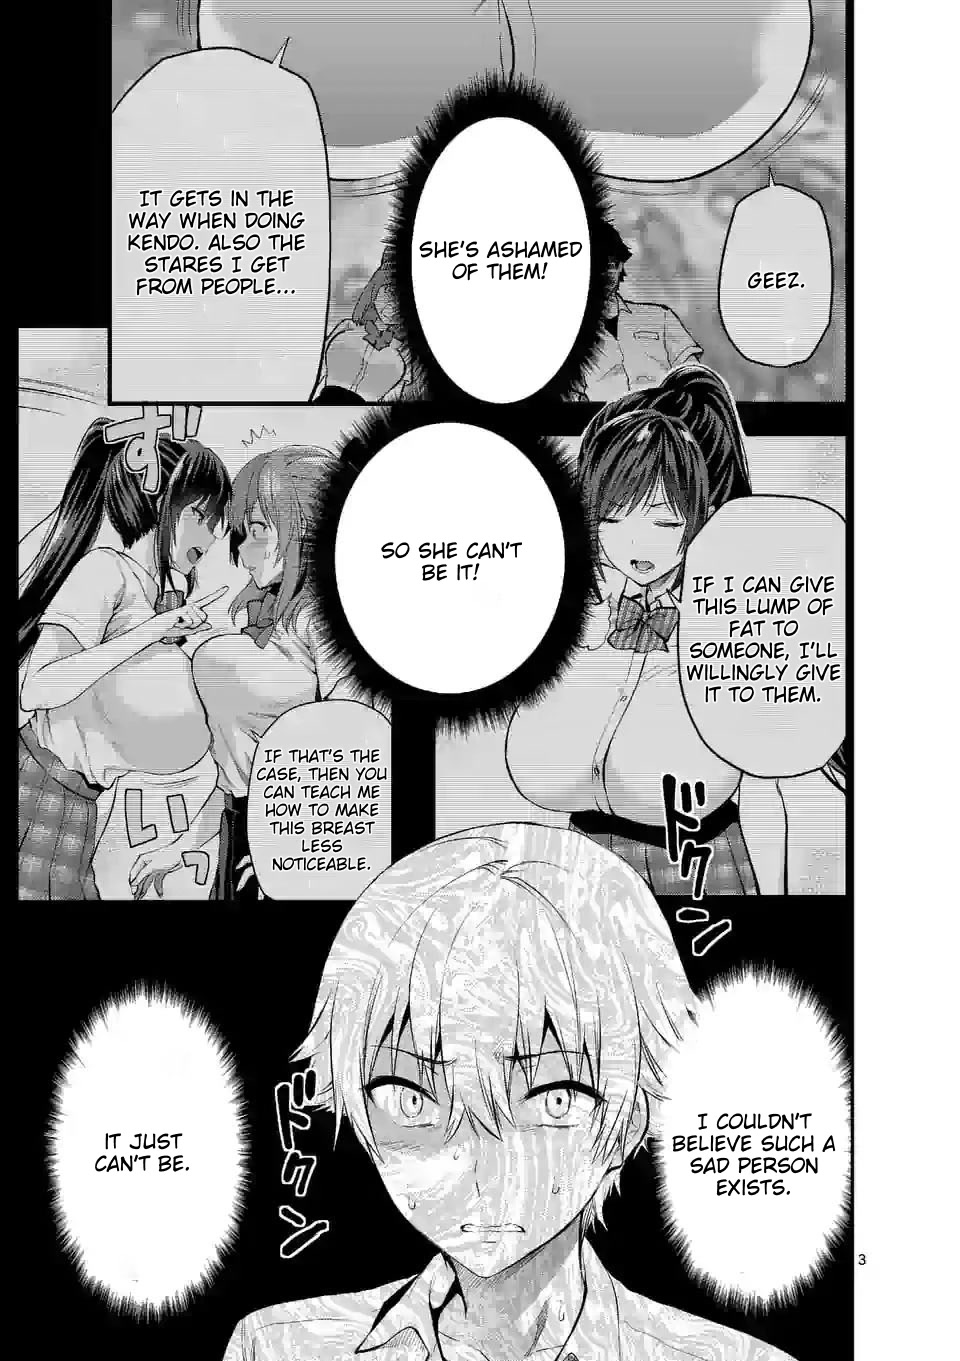 Climax Exorcism With A Single Touch! - Page 3